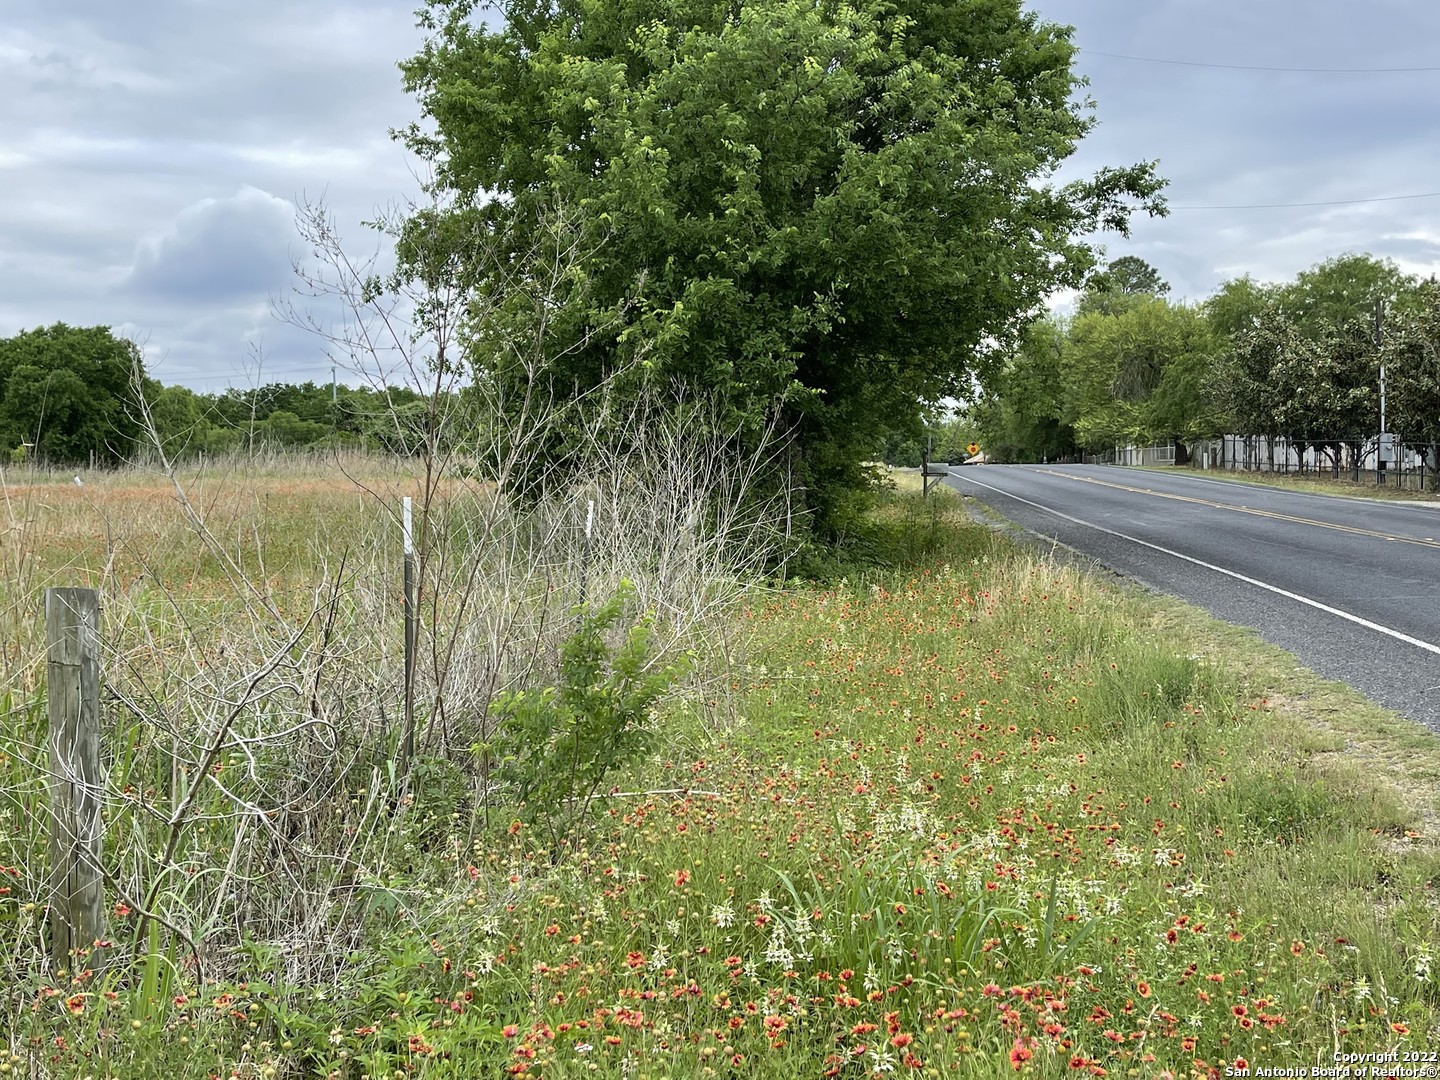 Over 80 acres of unrestricted property in San Antonio with access to Pleasanton Rd! Development opportunity, own your own ranch! Property was never surveyed but has metes and bounds, potential buyer to verify acreage. Additional acreage is available.